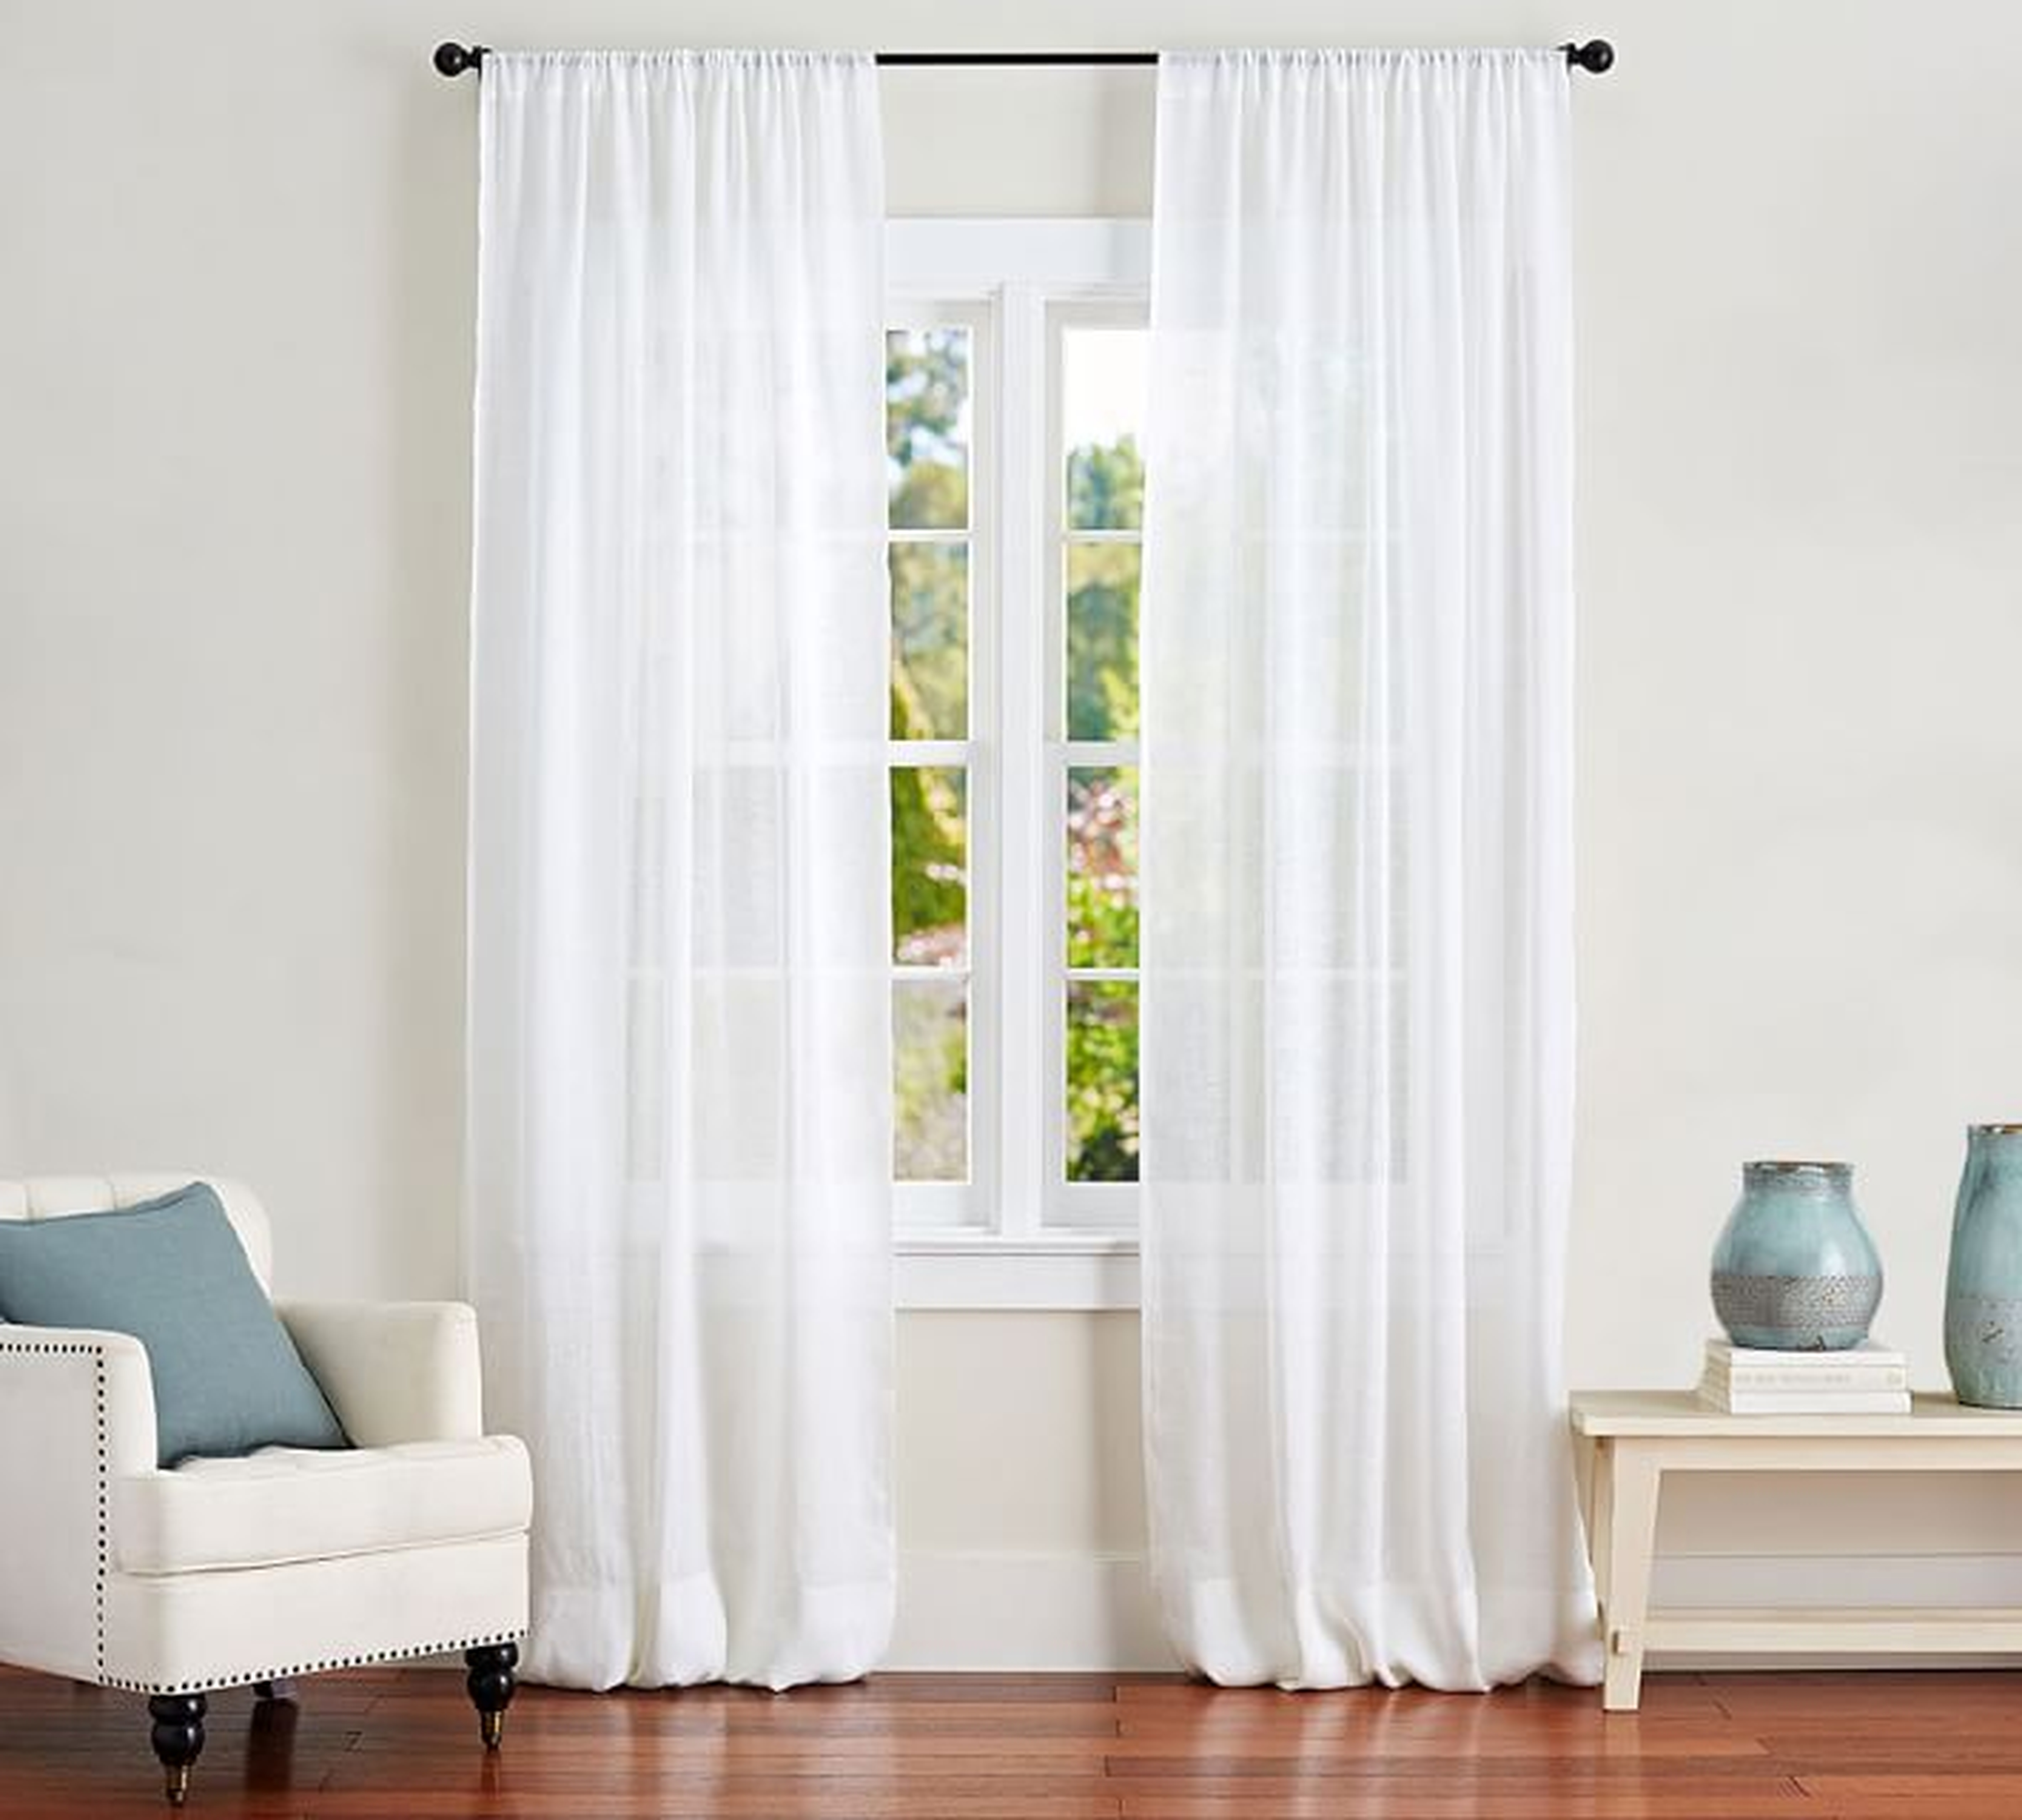 Belgian Linen Rod Pocket Sheer Curtain Made with Libeco(TM) Linen, 50 x 96", White - Pottery Barn